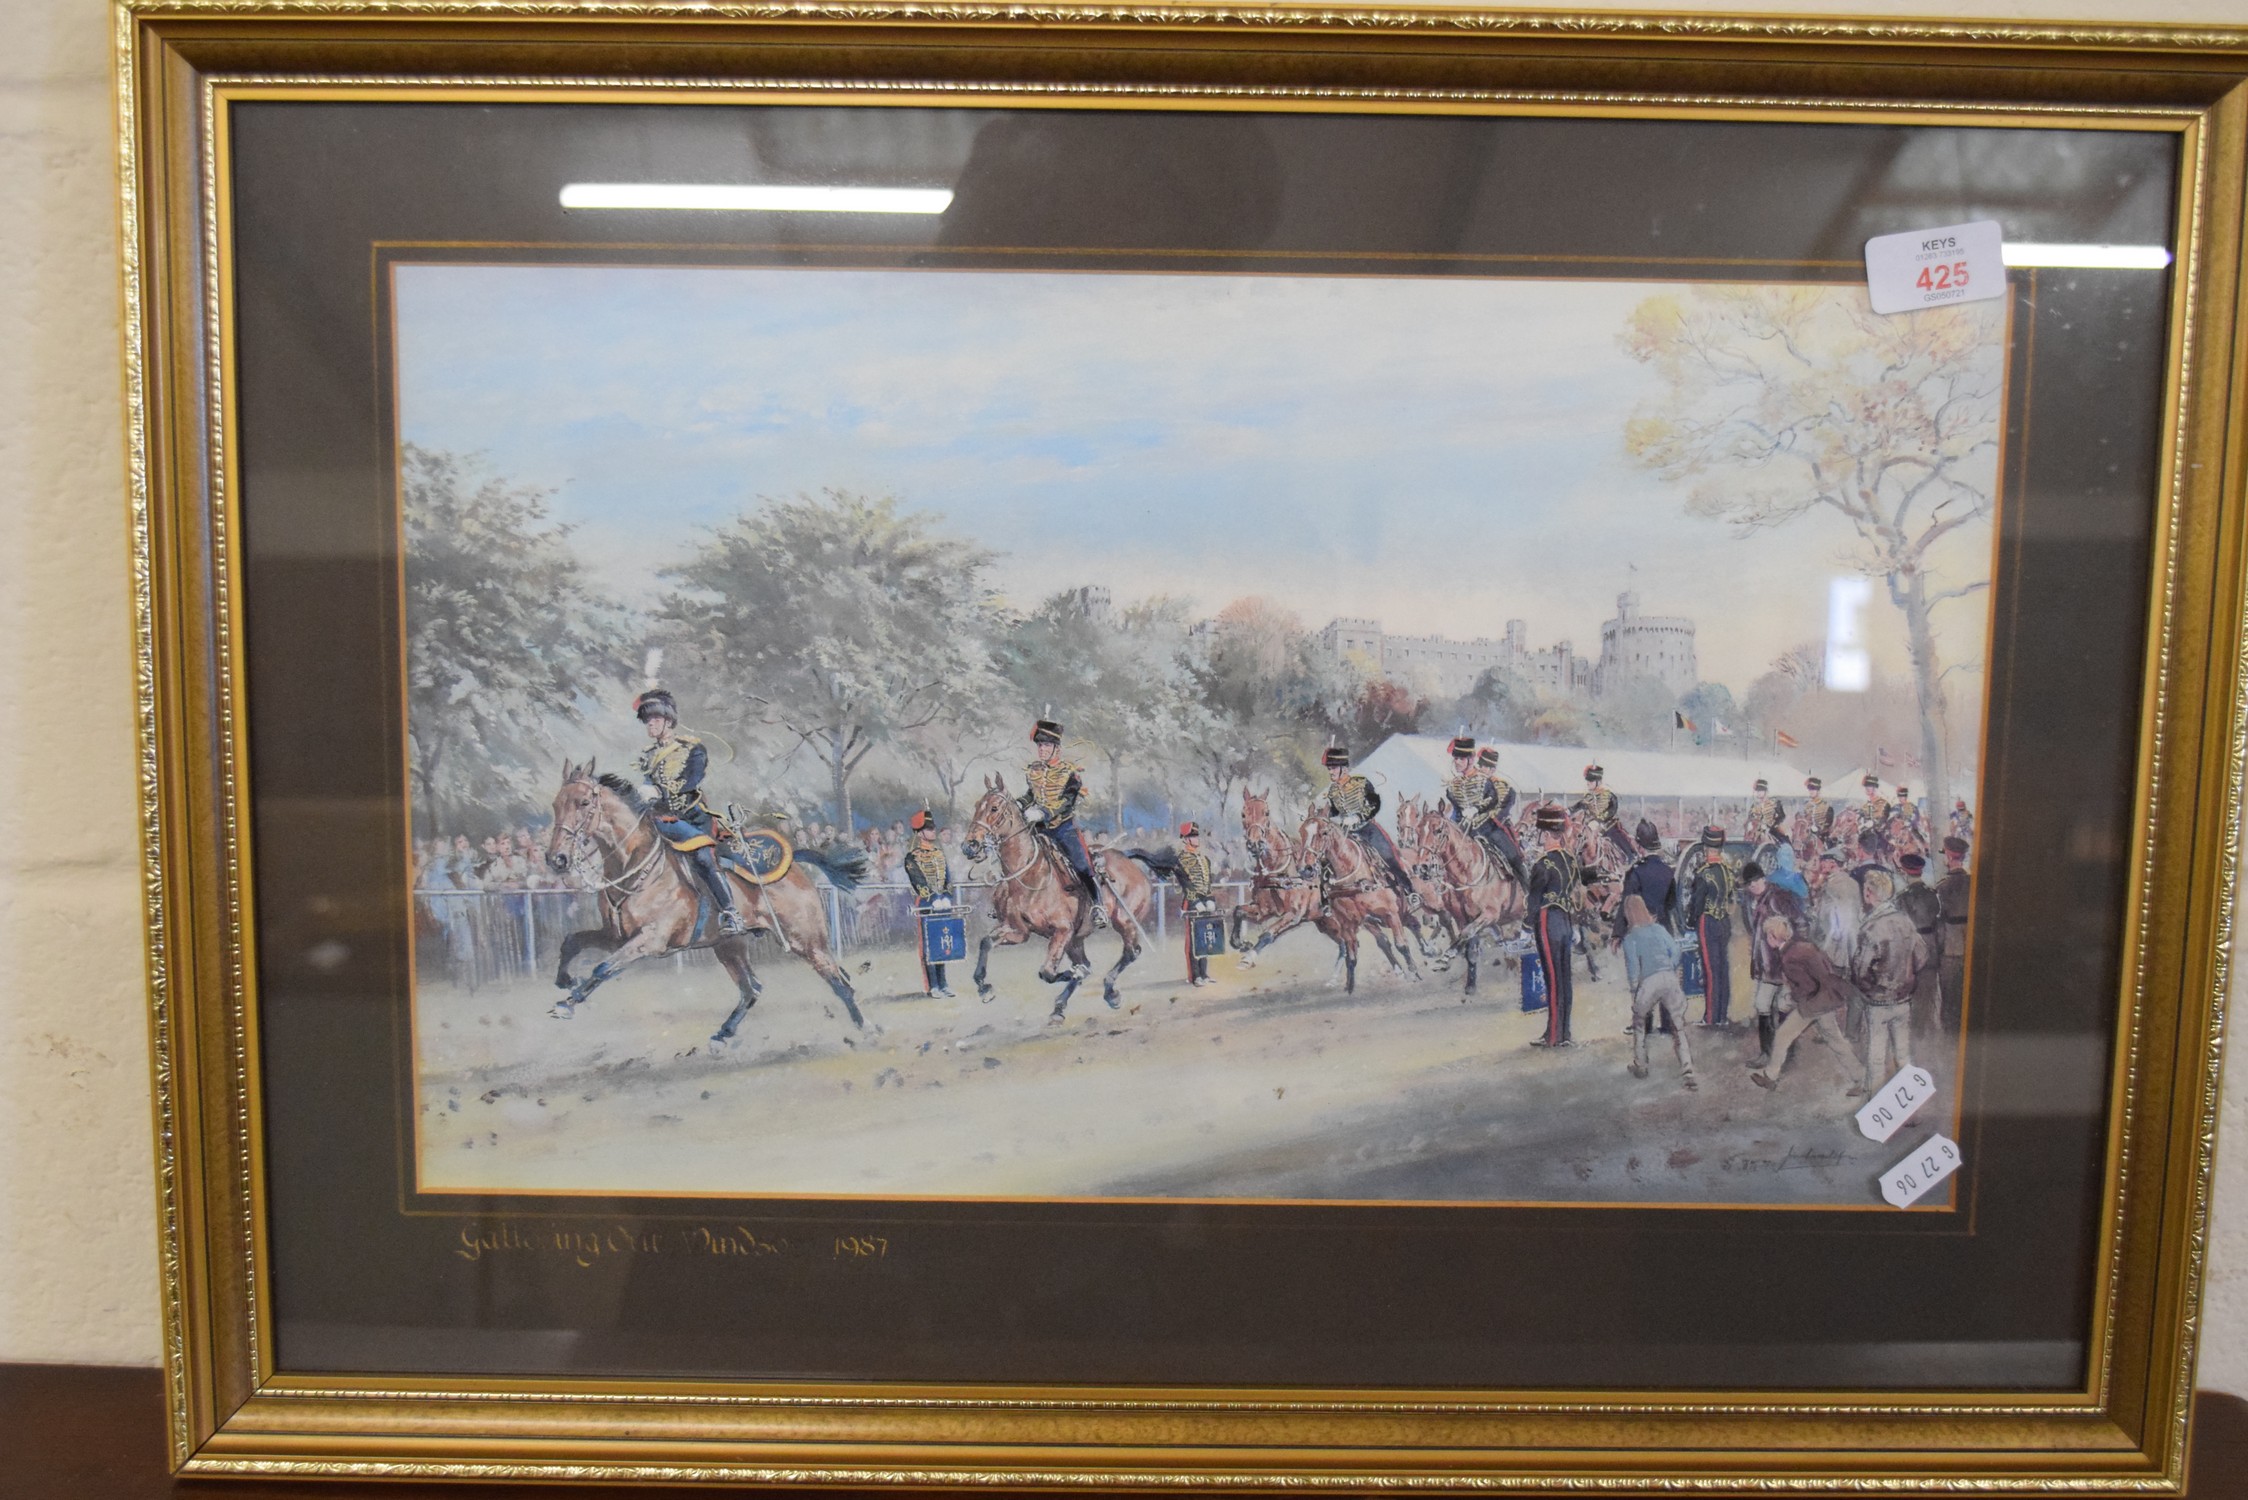 FRAMED MILITARY INTEREST PRINT DEPICTING THE ROYAL HORSE ARTILLERY ENTITLED "GALLOPING OUT WINDSOR